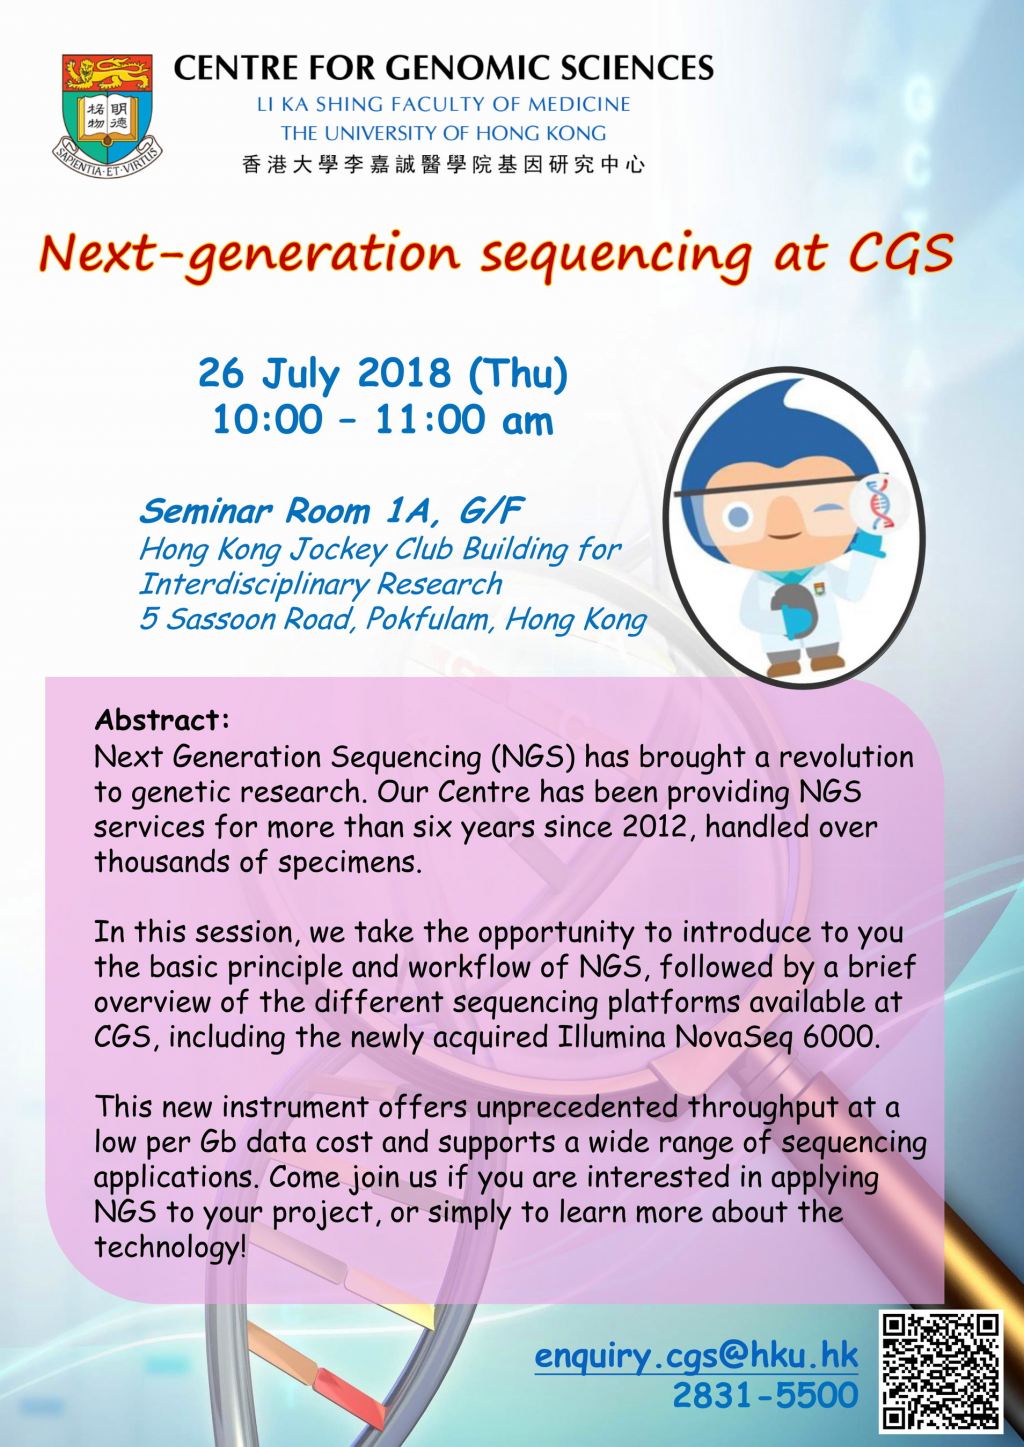 Sharing Session: Next-generation sequencing at CGS